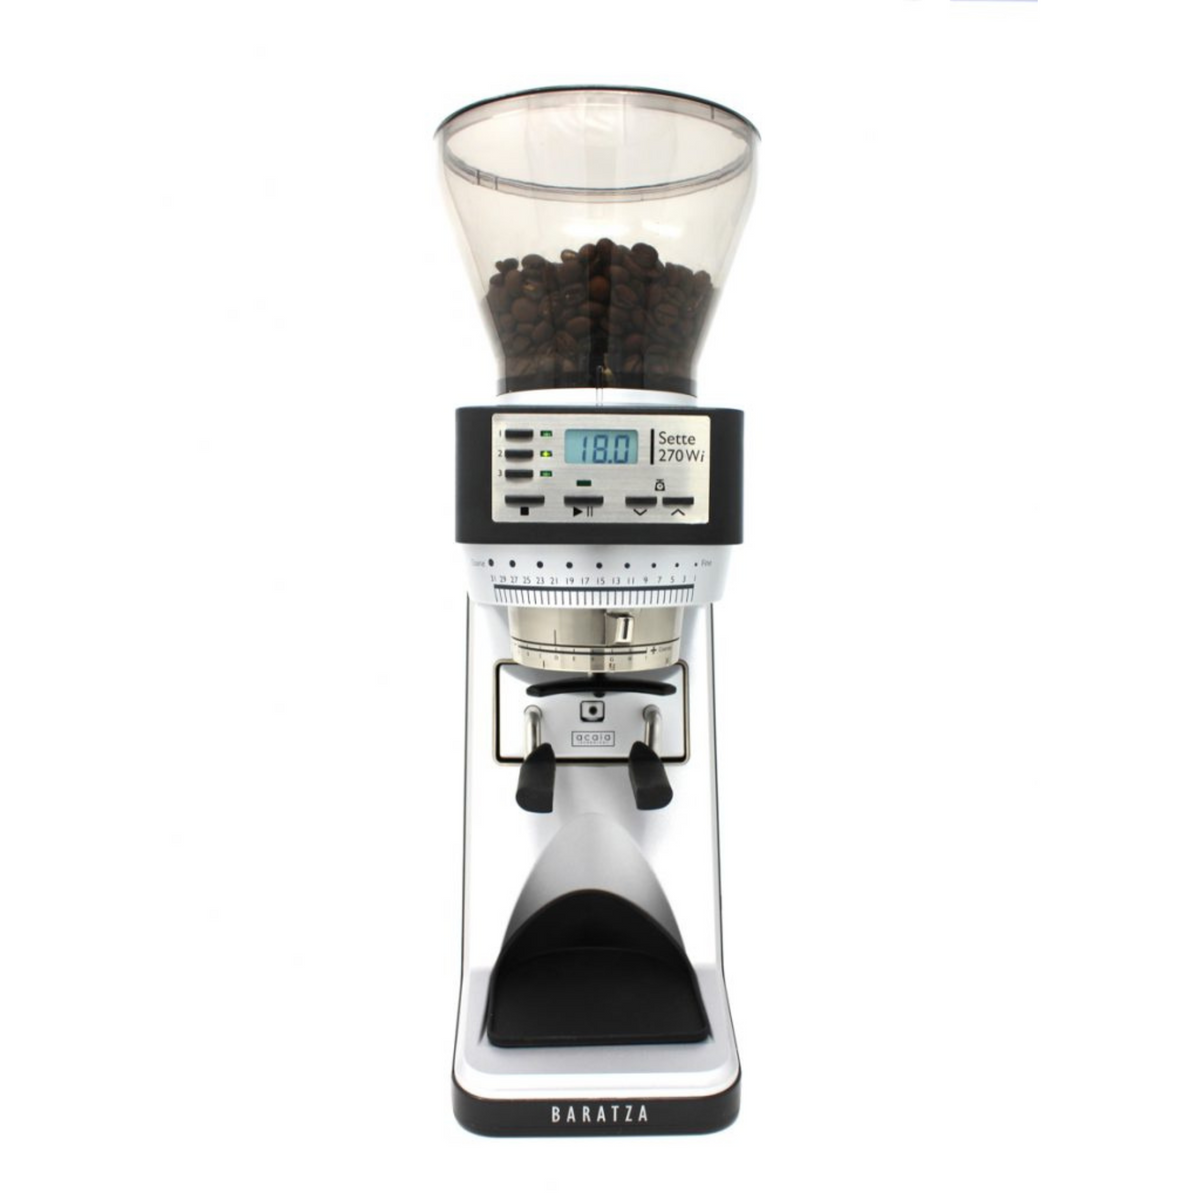 Baratza Sette 270Wi Weight-based Conical Burr Coffee Grinder